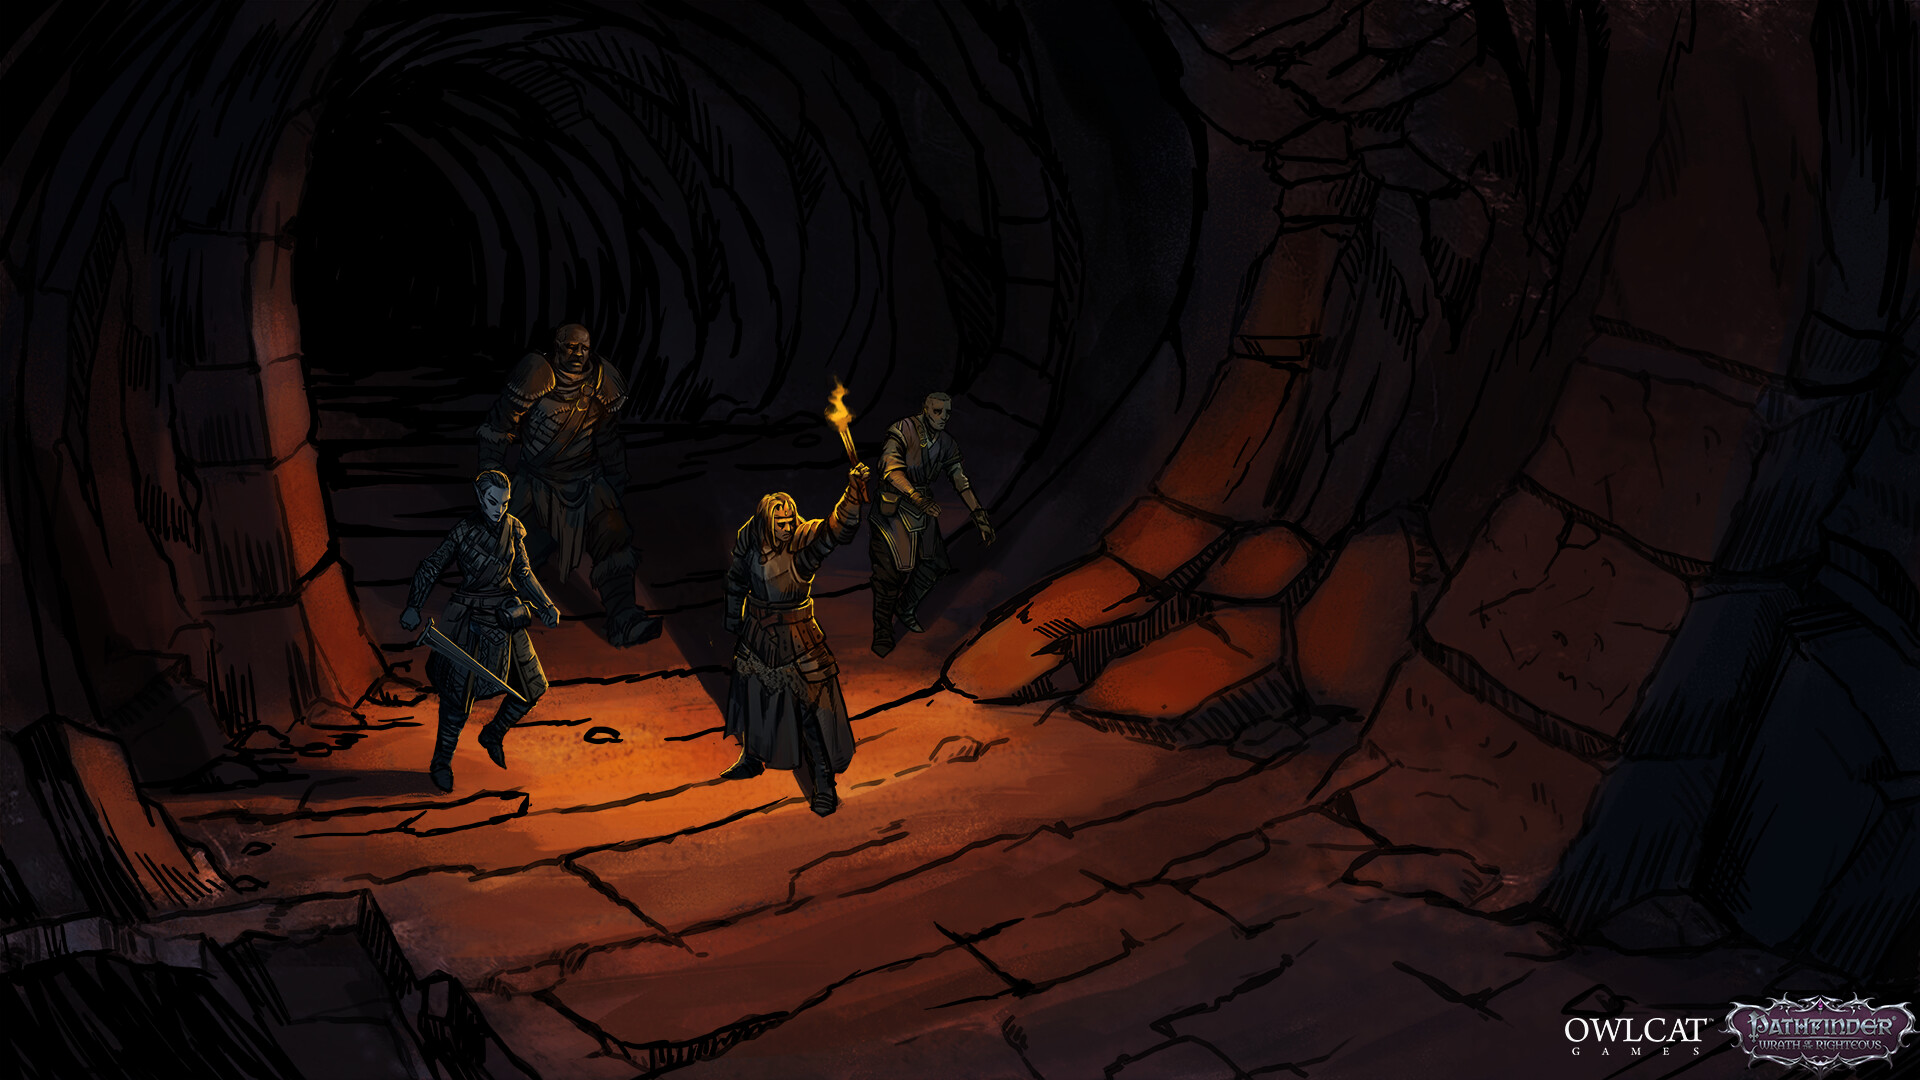 Pathfinder: Wrath of the Righteous HD wallpaper featuring characters exploring an ominous dungeon with torches.